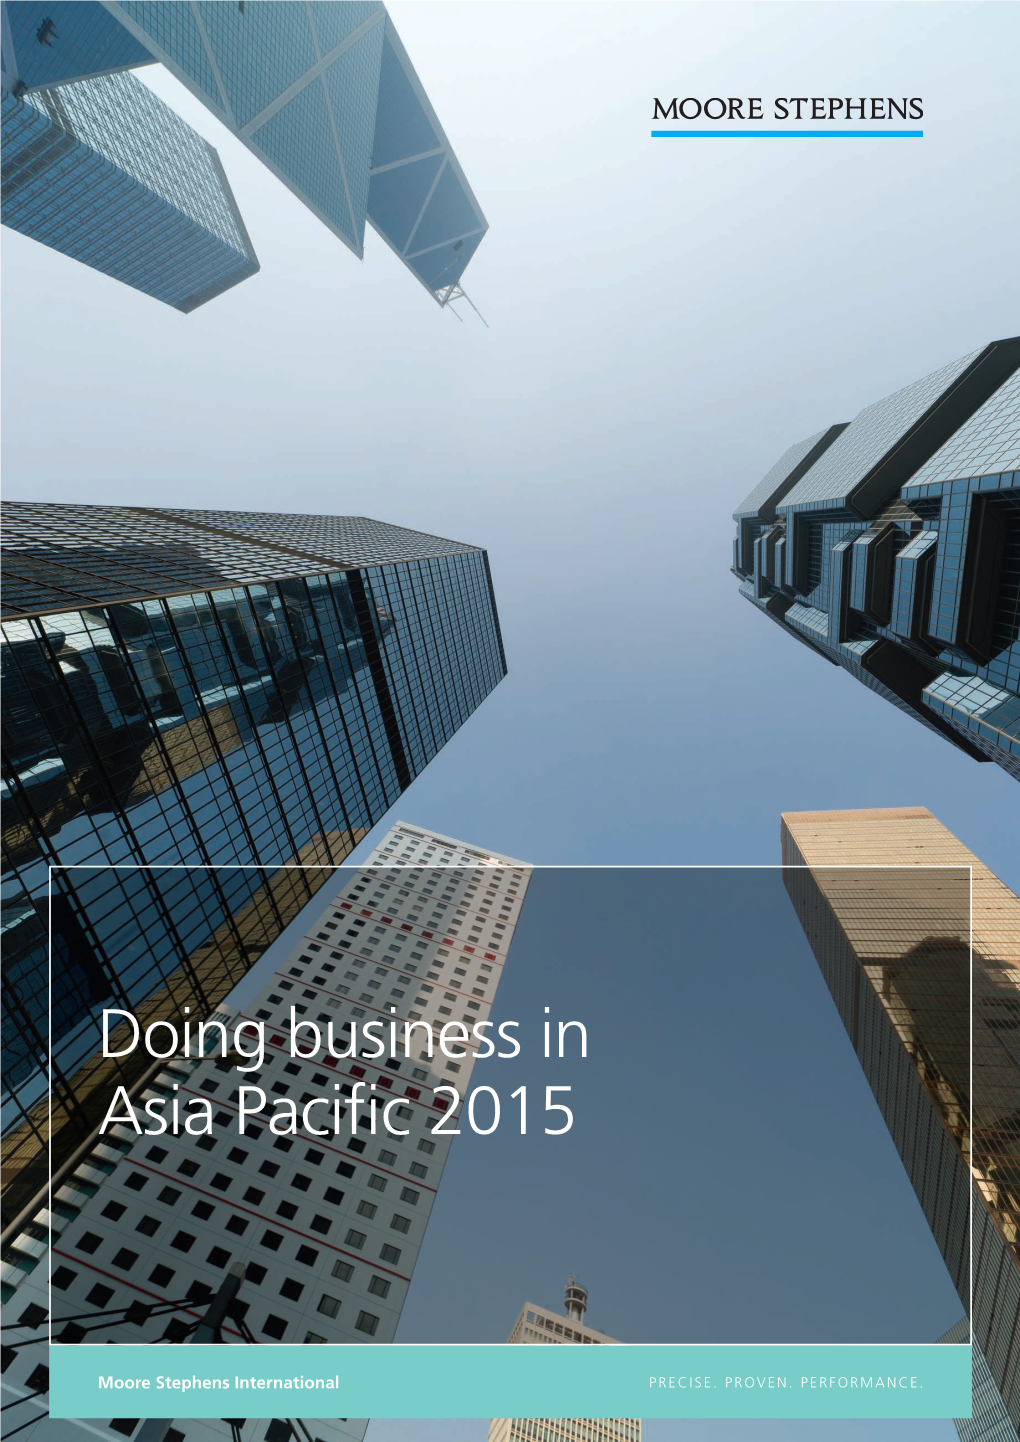 DPS26890 Doing Business in Asia Pacific 2015 SW.Indd